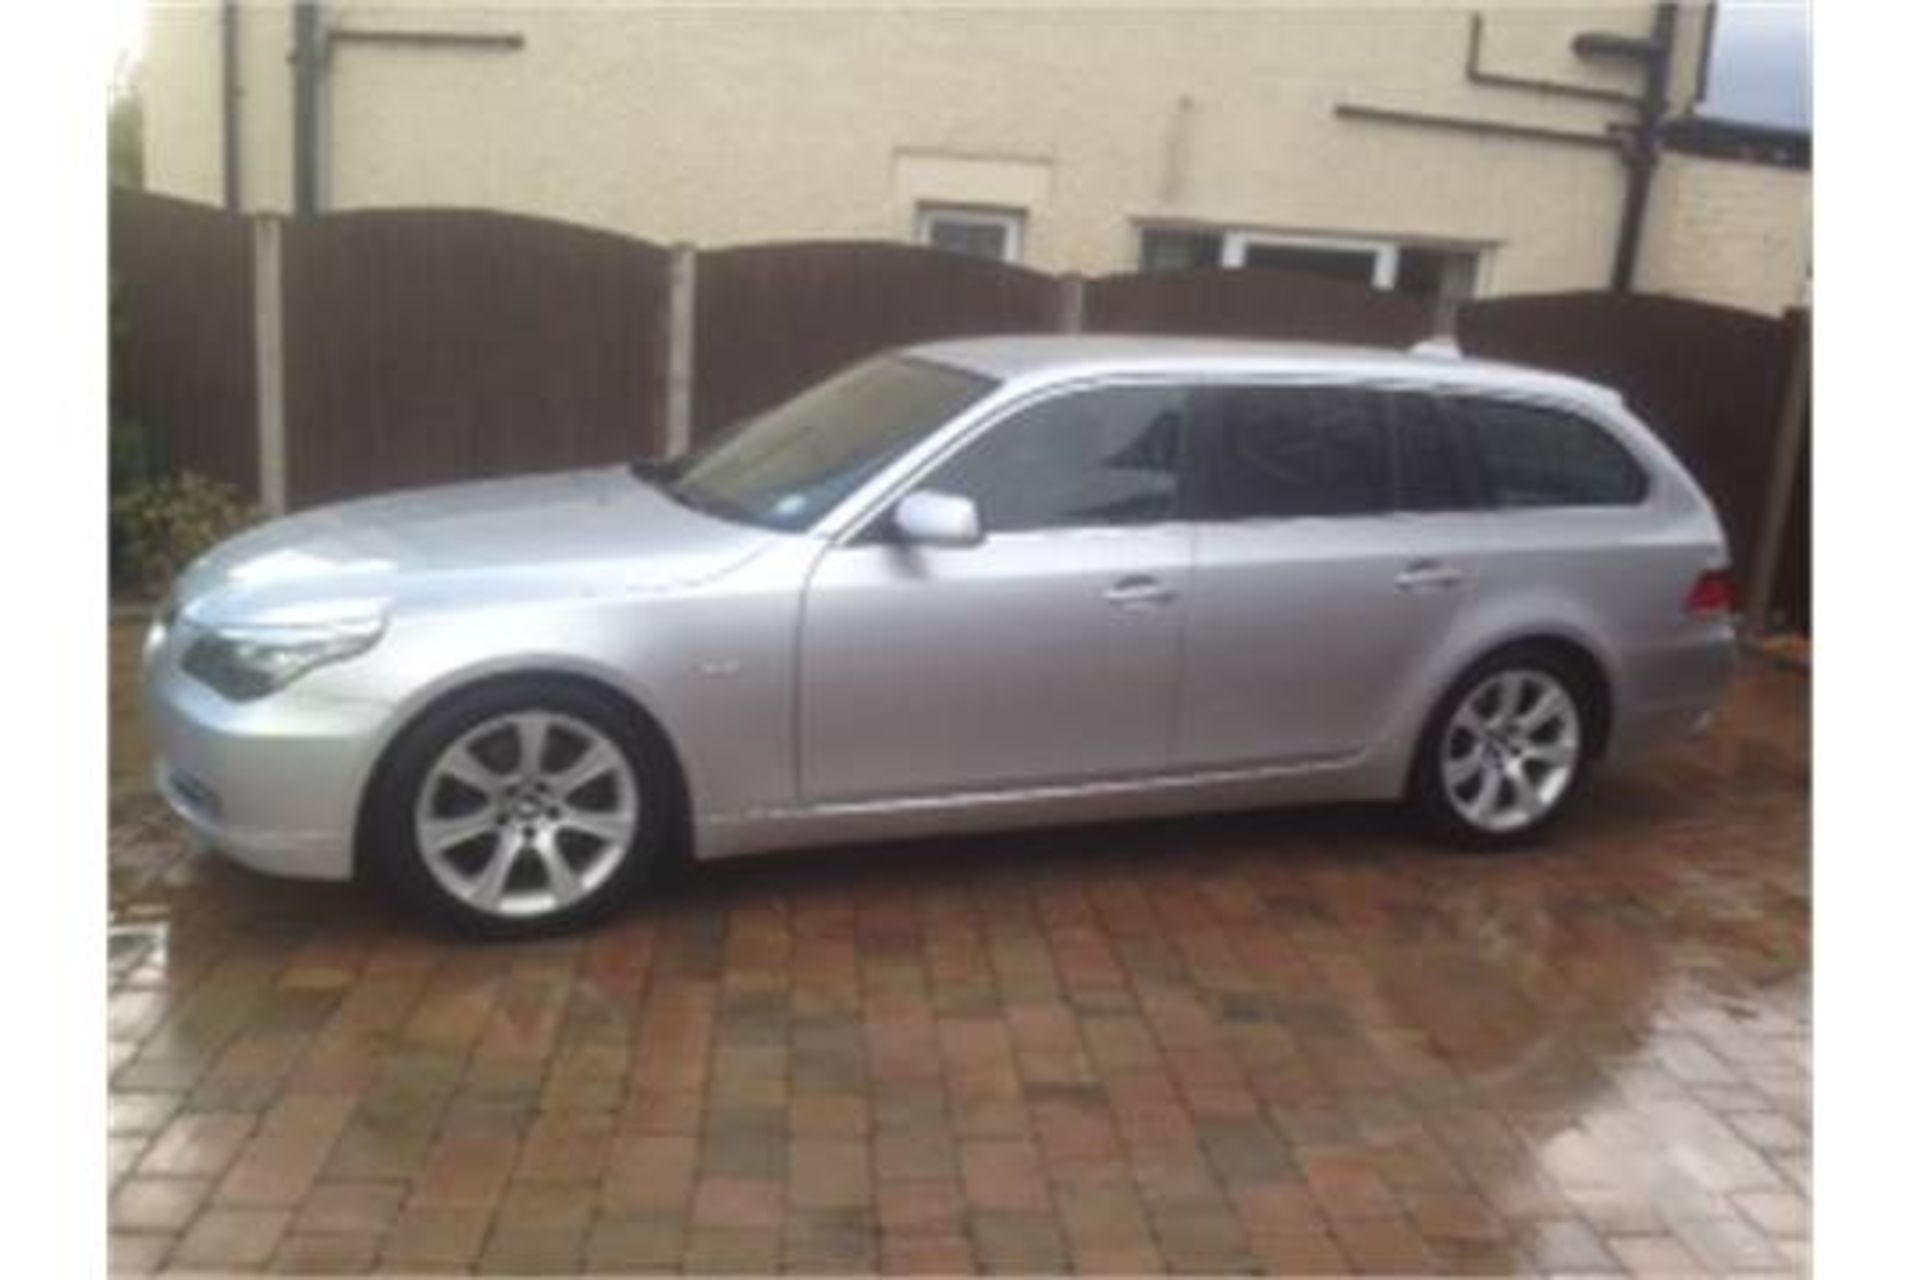 BMW 5 SERIES TOURING 530D, BX58 PNN, 3.0L TD 6 SPEED, DIESEL, AUTOMATIC I DRIVE, 5 DOOR, 95,000 - Image 10 of 10